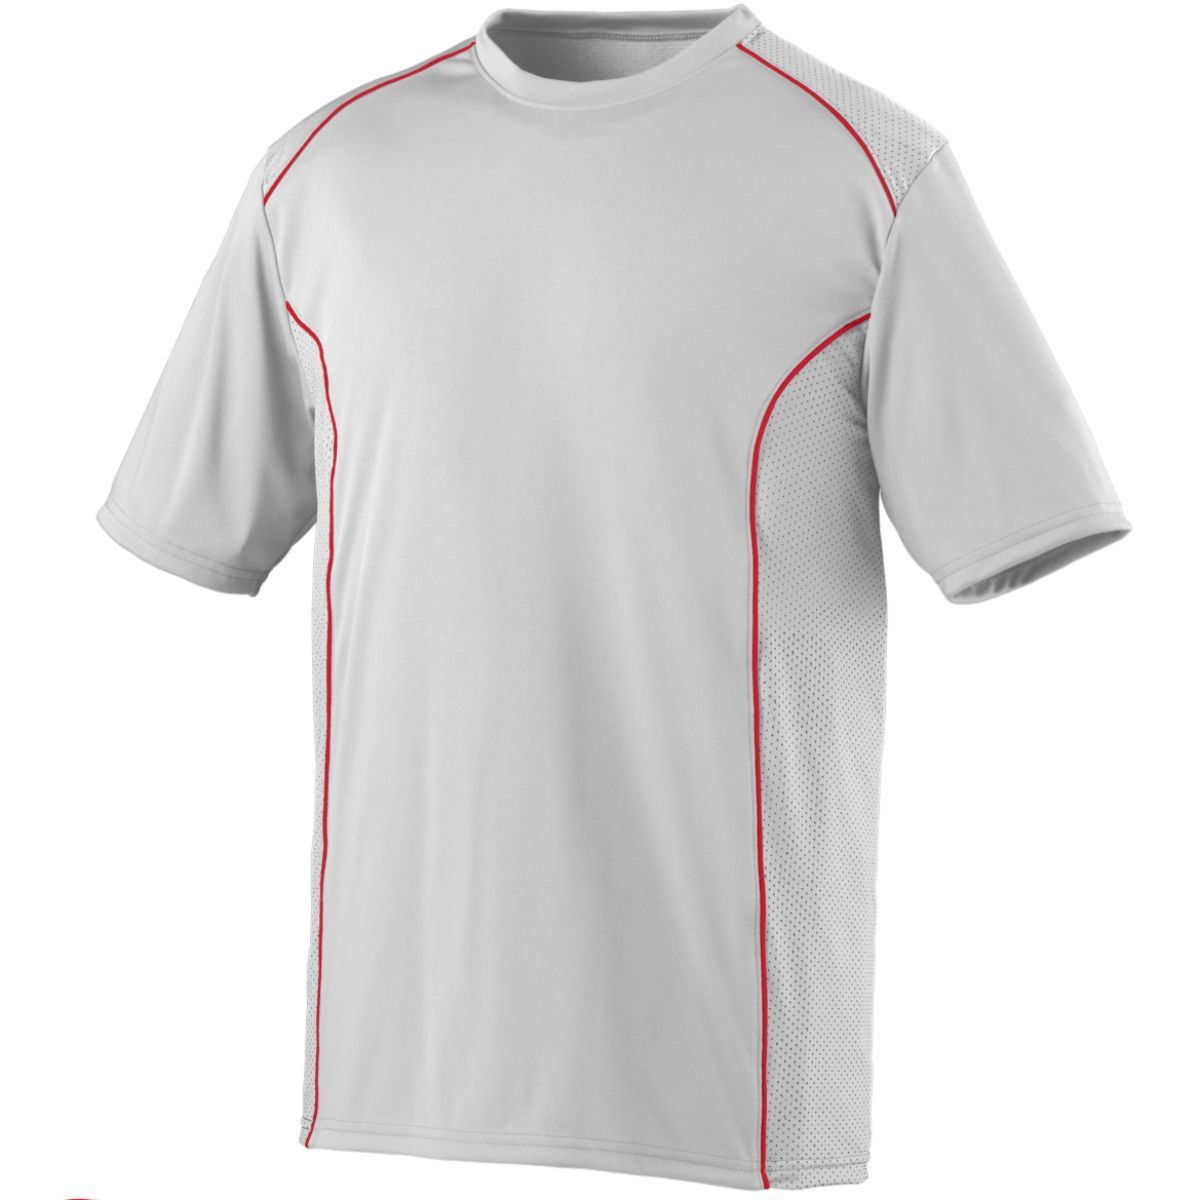 Augusta Sportswear Youth Winning Streak Crew in White/Red  -Part of the Youth, Augusta-Products, Soccer, All-Sports-1 product lines at KanaleyCreations.com